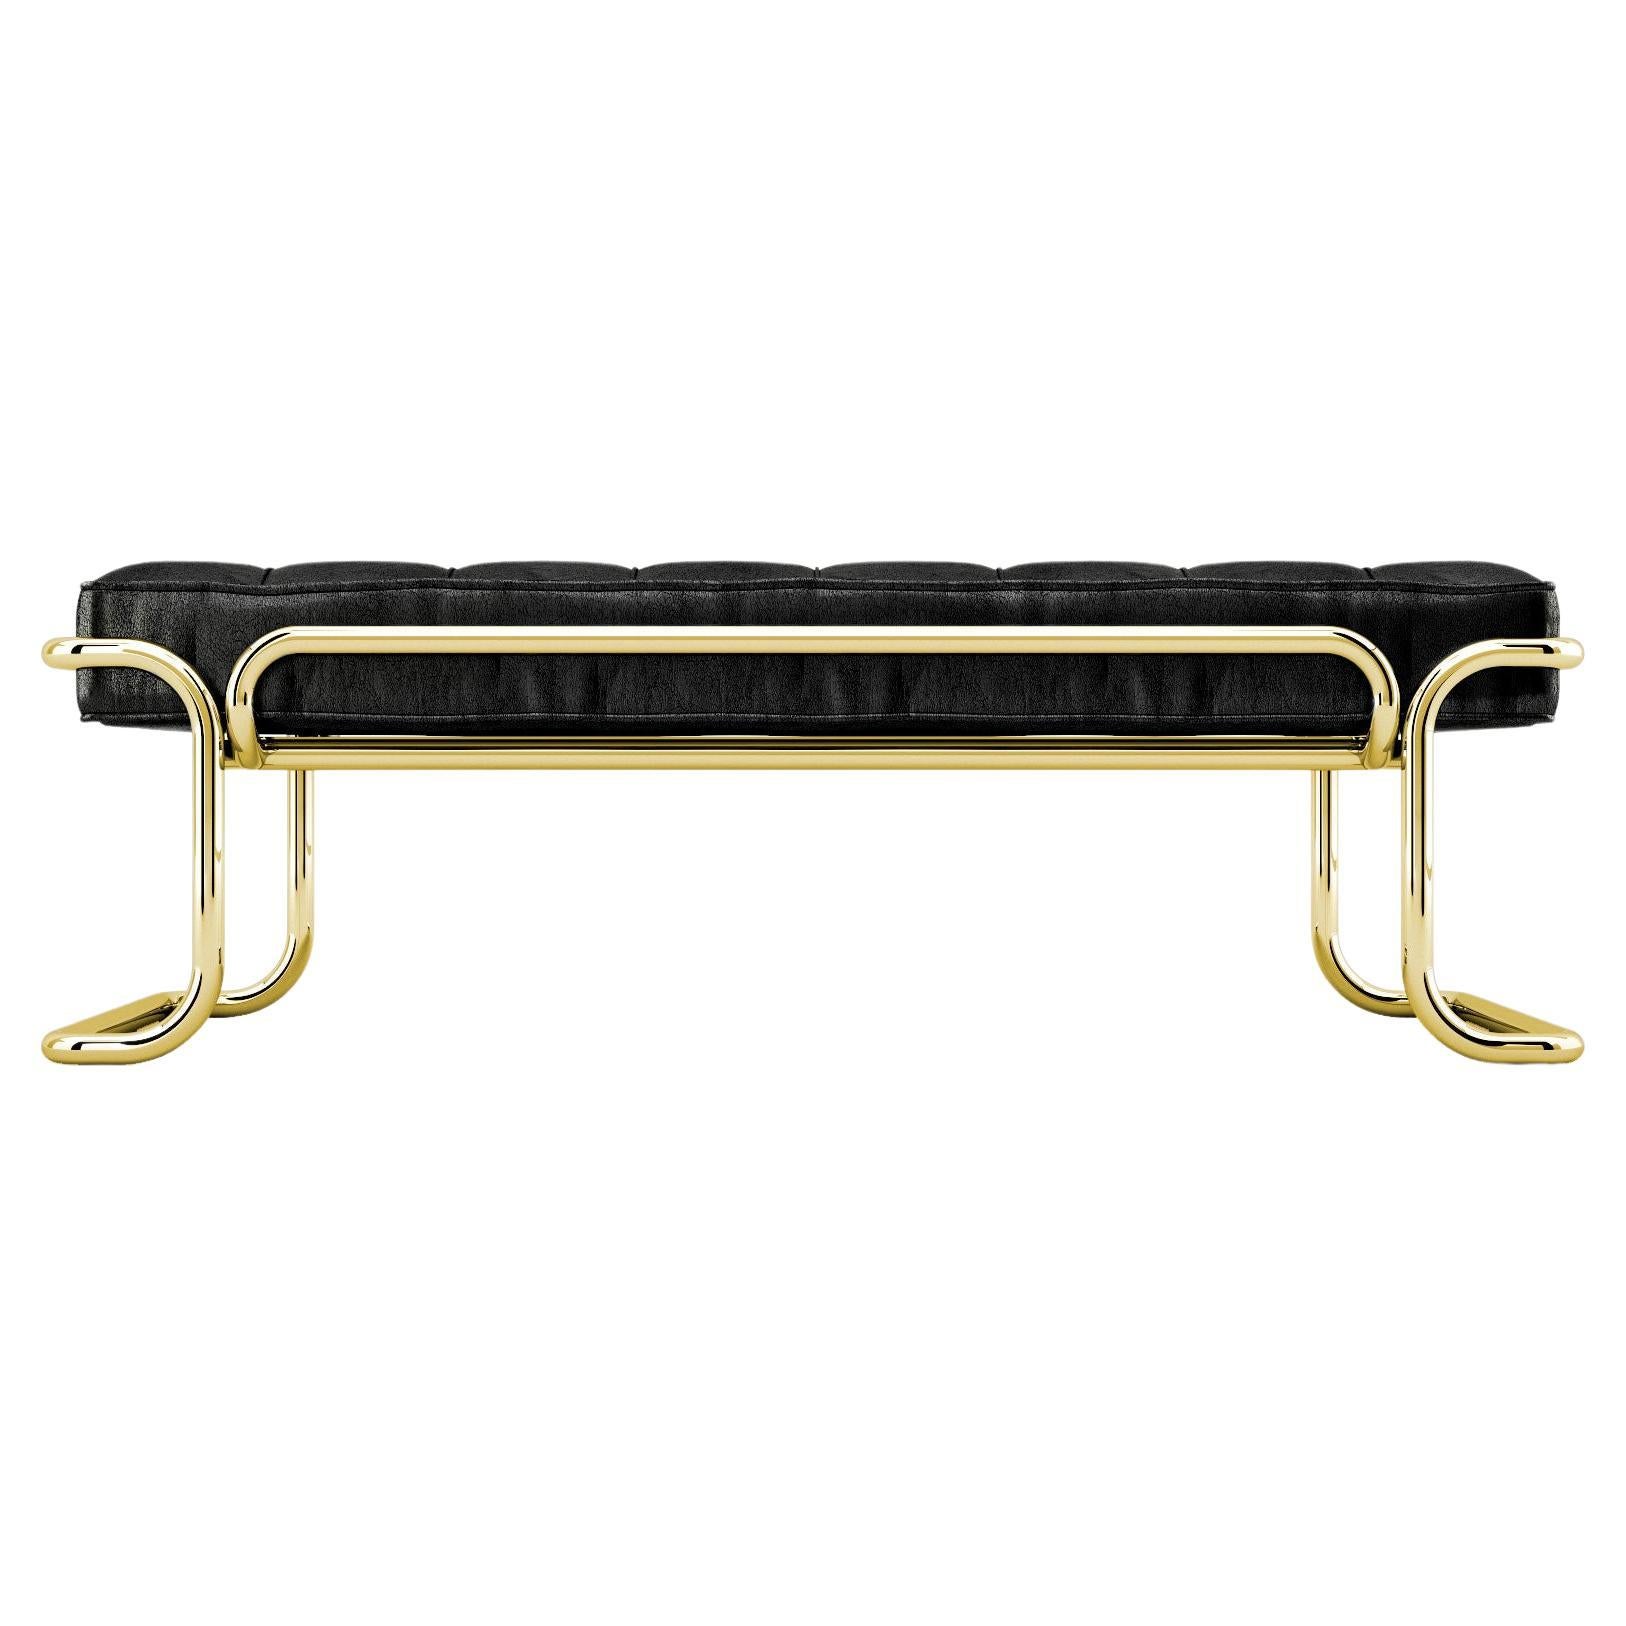 Lotus Banquette - Modern Black Leather Sofa with Brass Legs For Sale